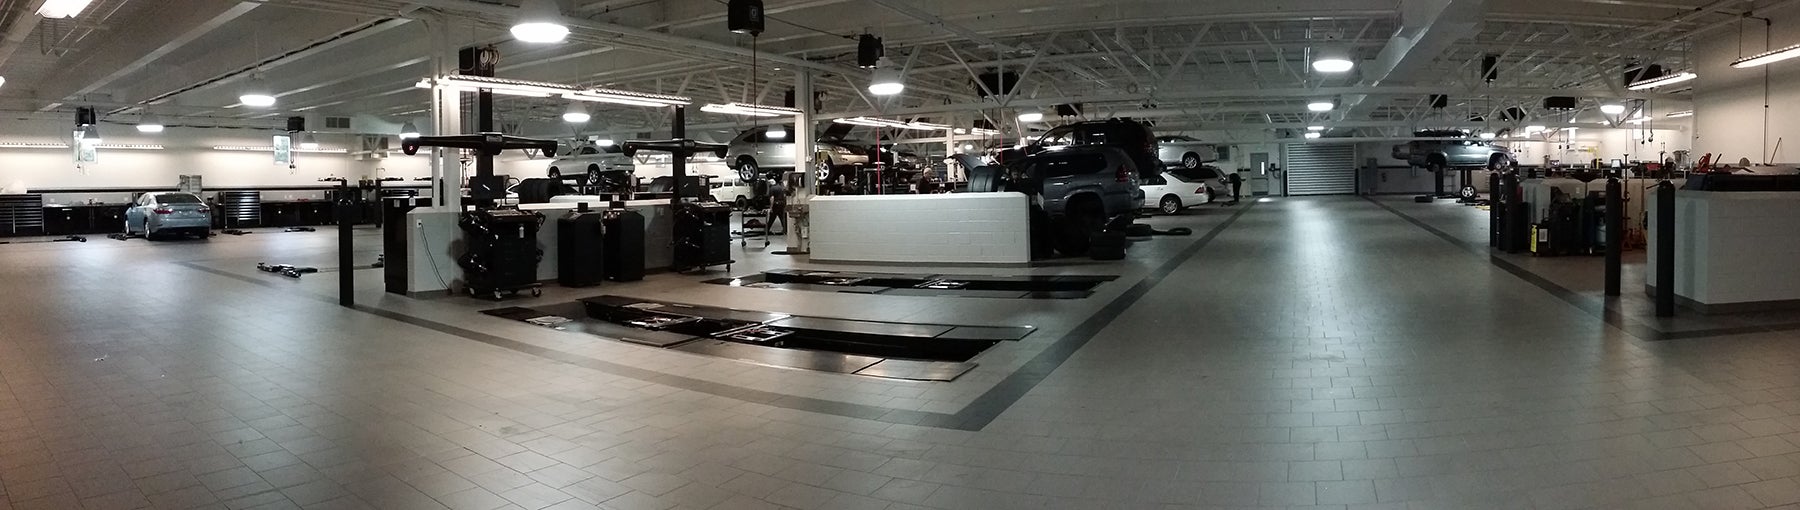 Service & Parts Department - Scanlon Lexus of Fort Myers in Fort Myers FL